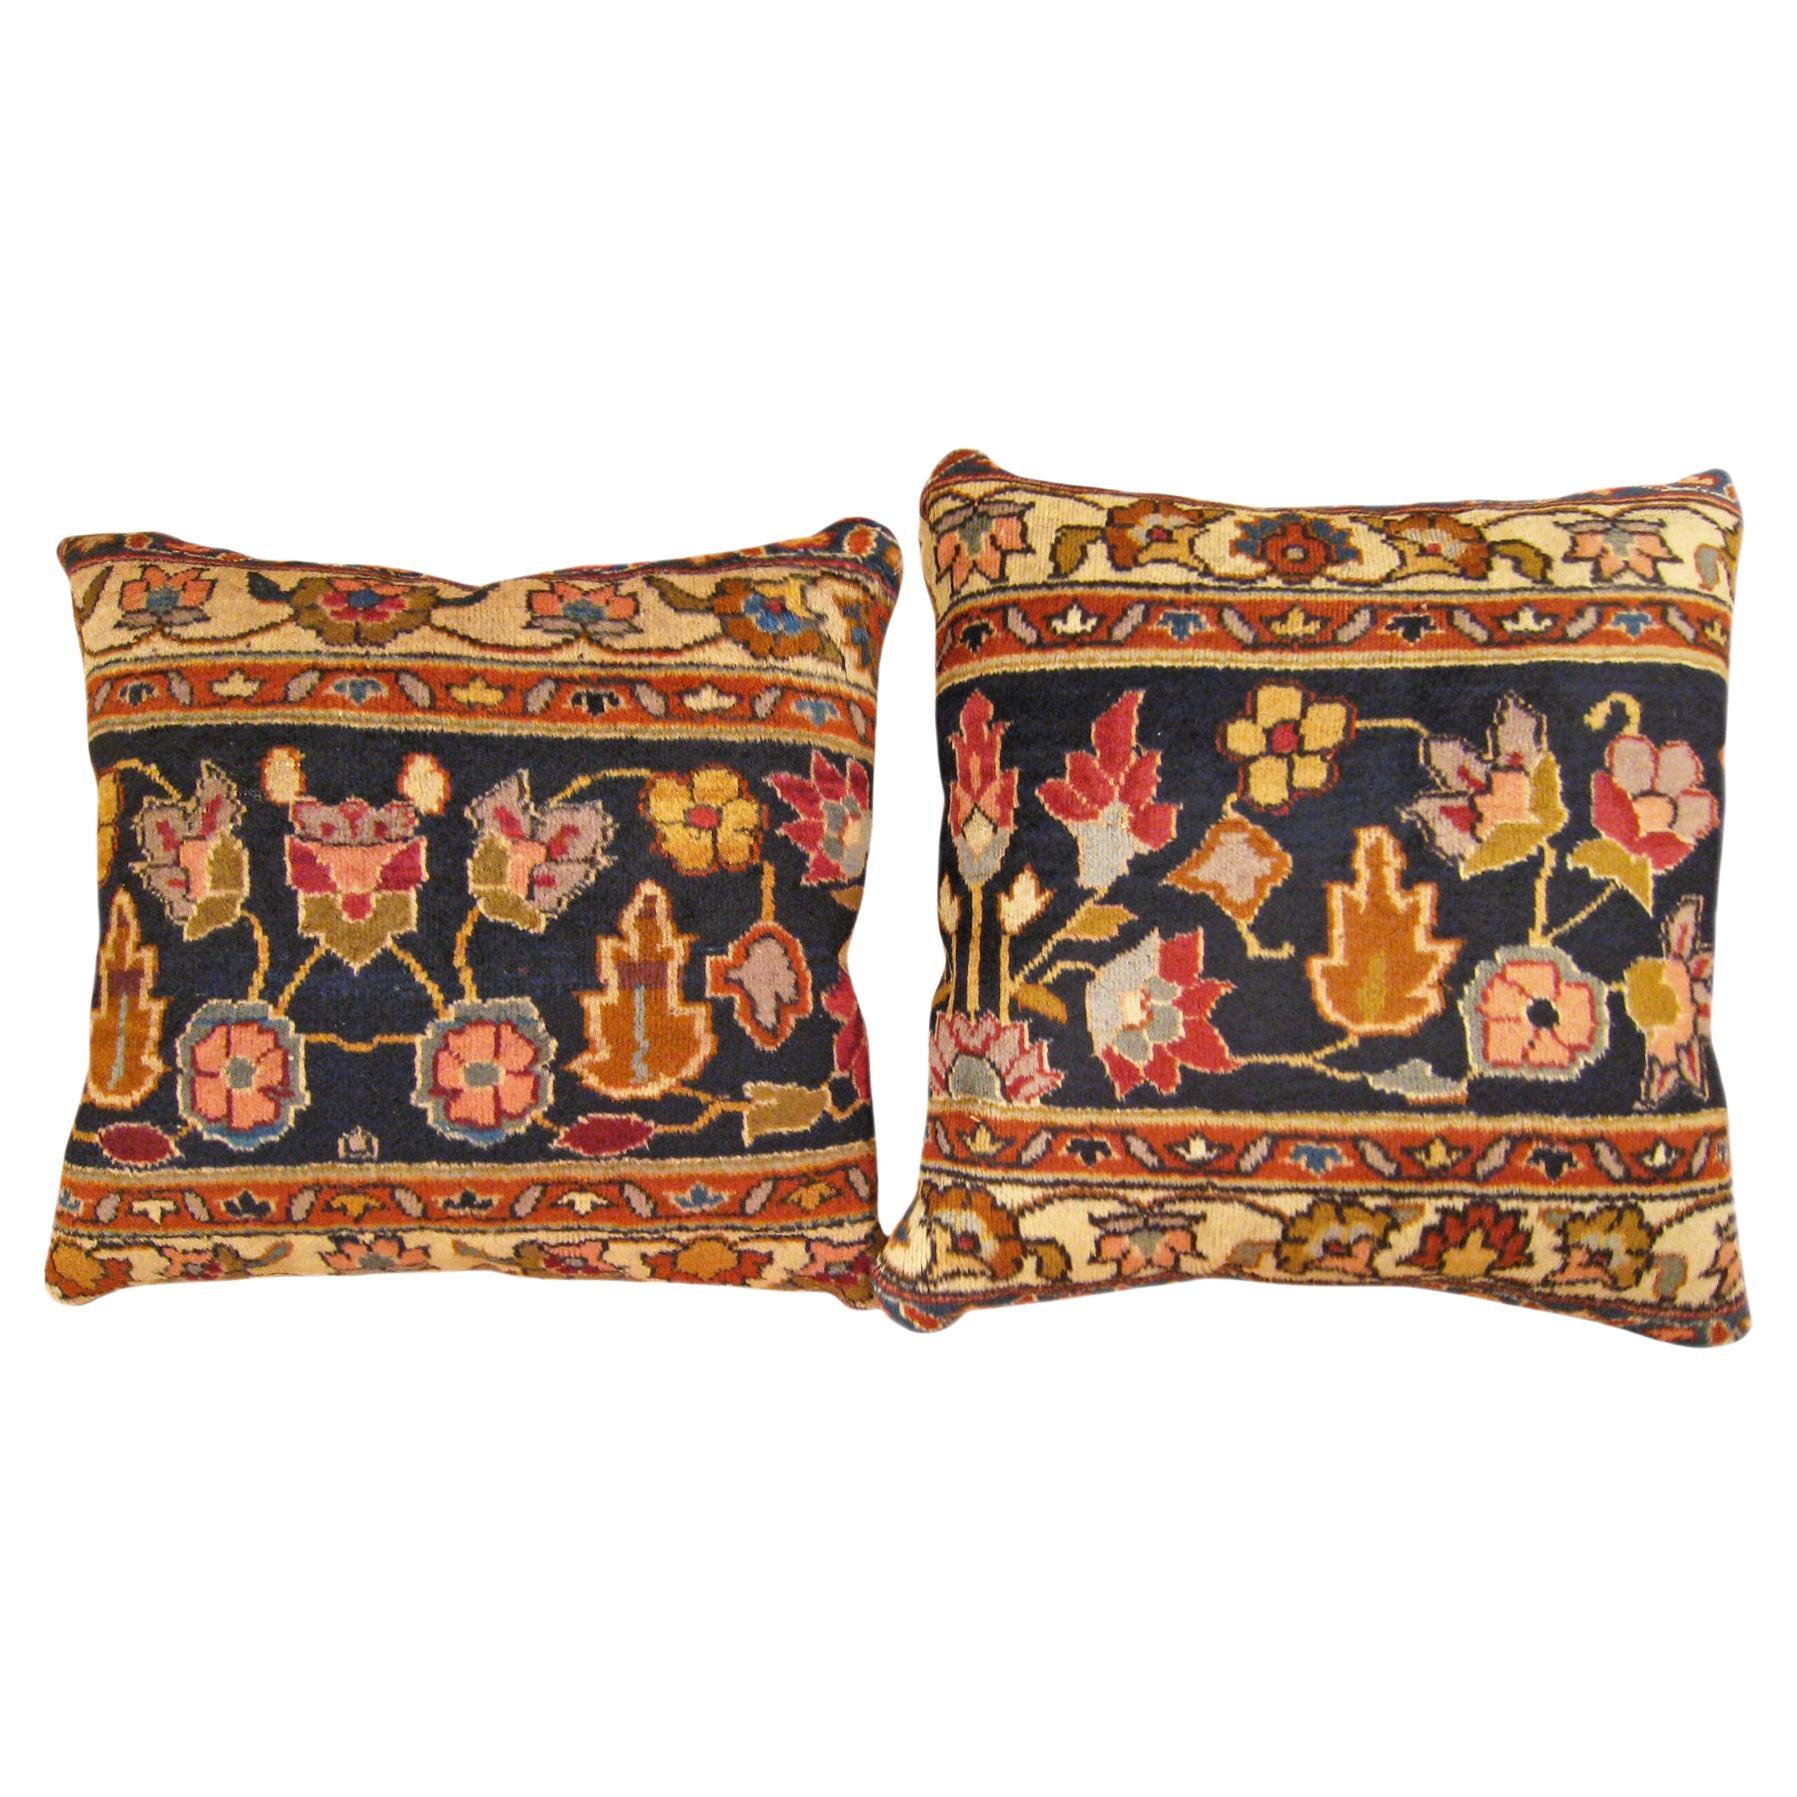 Pair of Decorative Antique Indian Agra Rug Pillows with Floral Elements